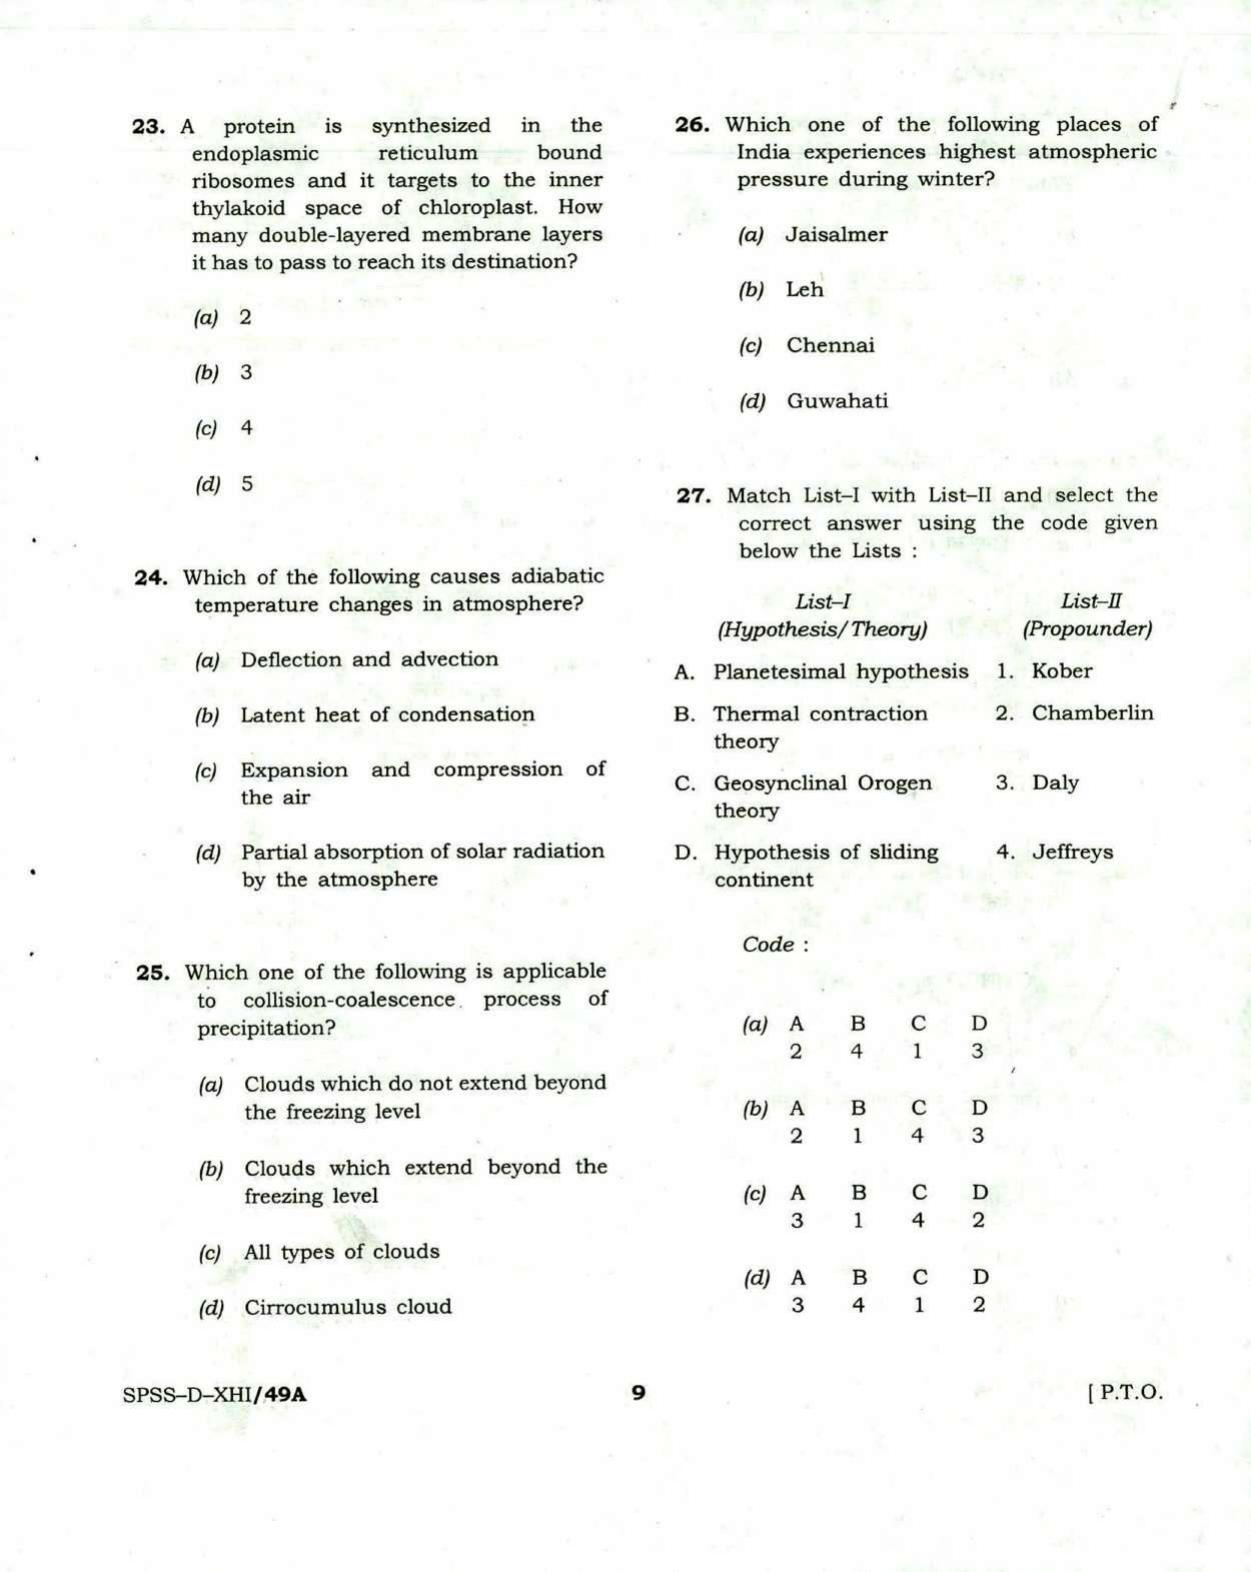 PBSSD General Knowledge Solved Papers - Page 9